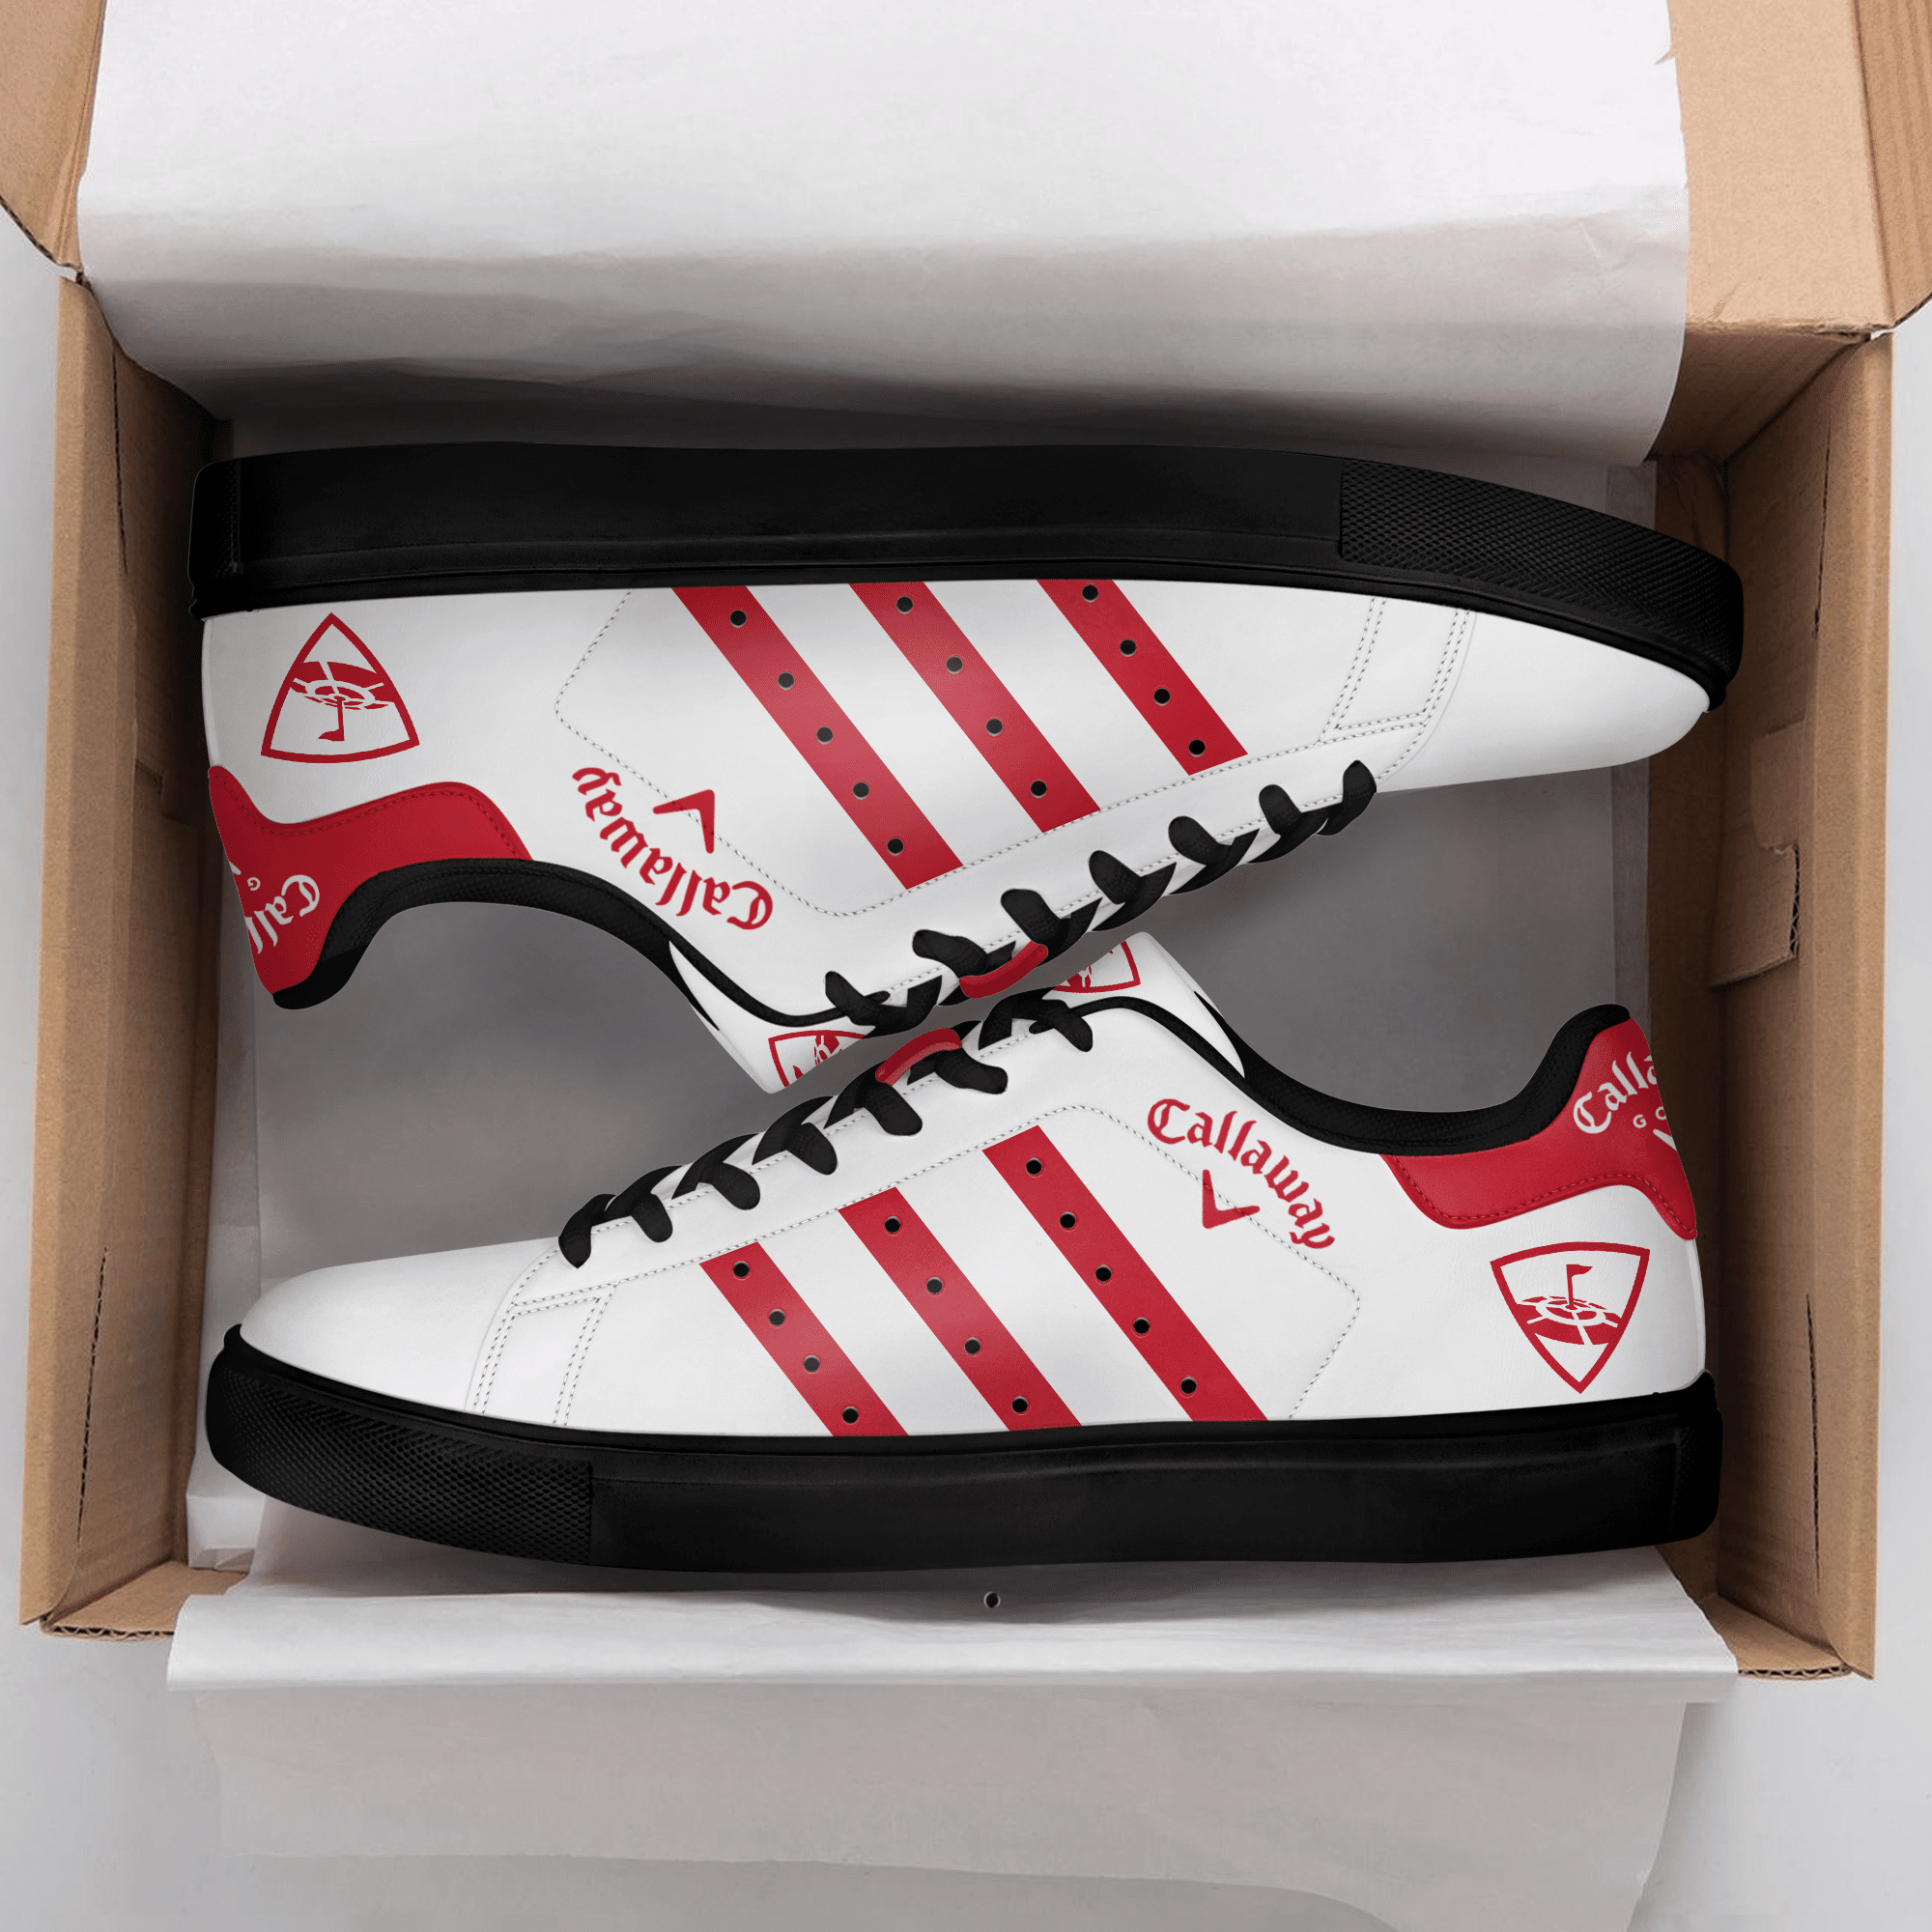 callaway golf red stan smith shoes 9812 54ySO